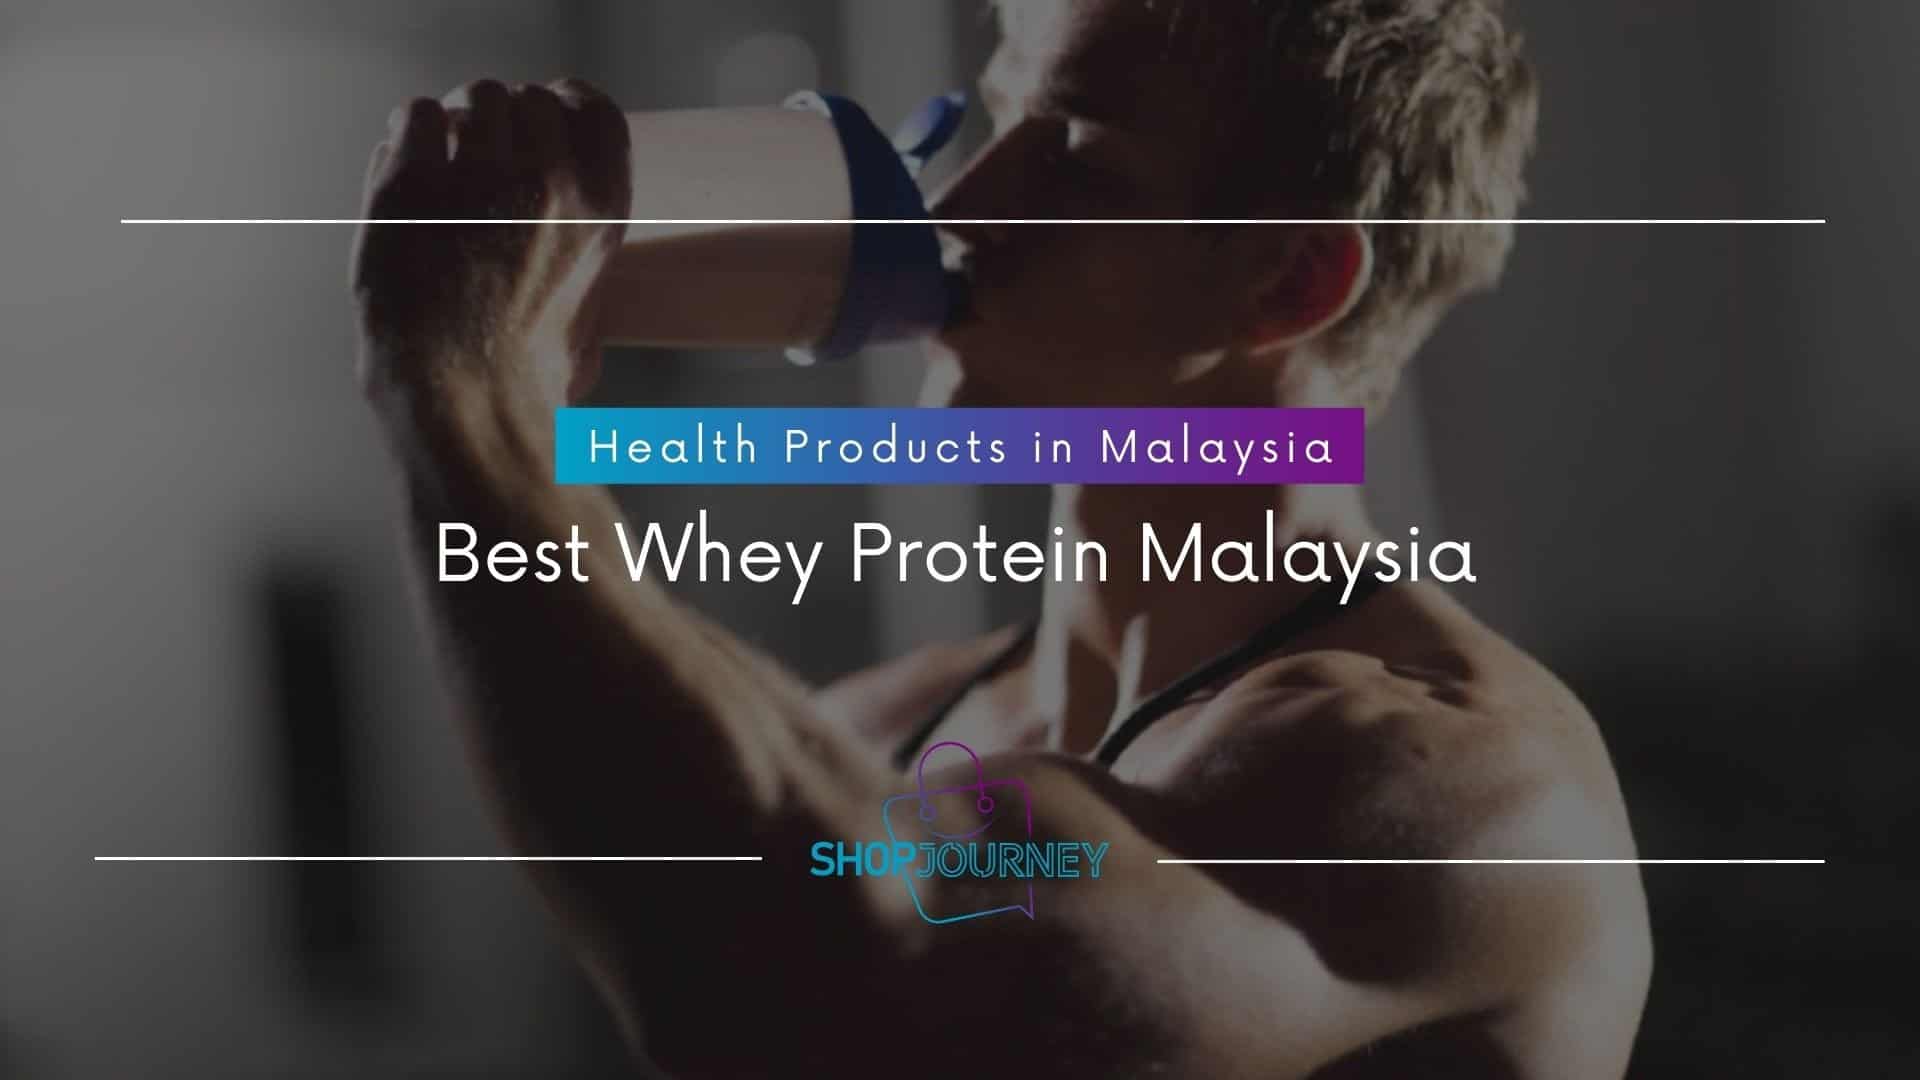 Best whey protein and serums in Malaysia.